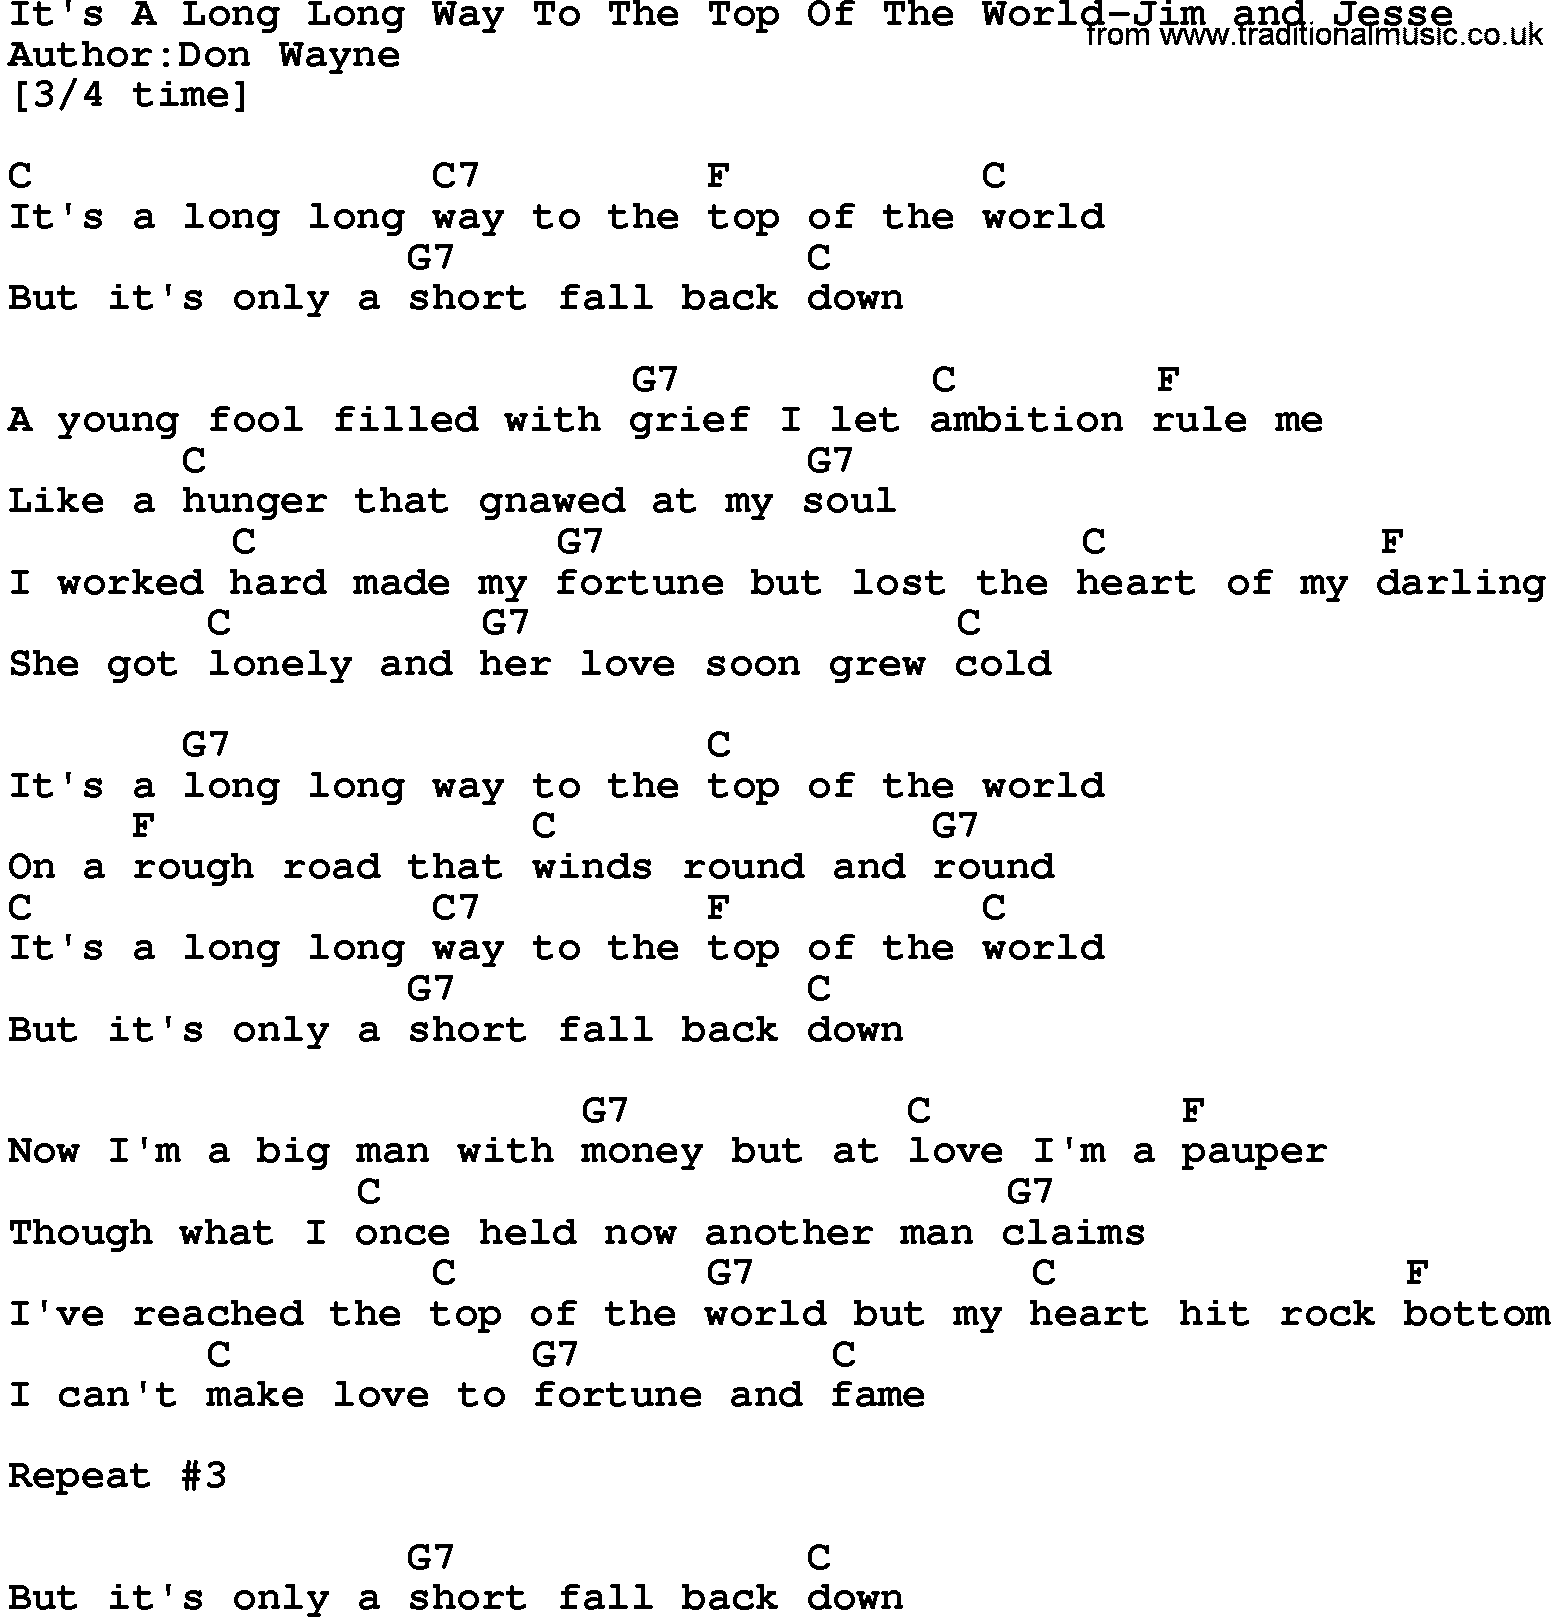 Country music song: It's A Long Long Way To The Top Of The World-Jim And Jesse lyrics and chords